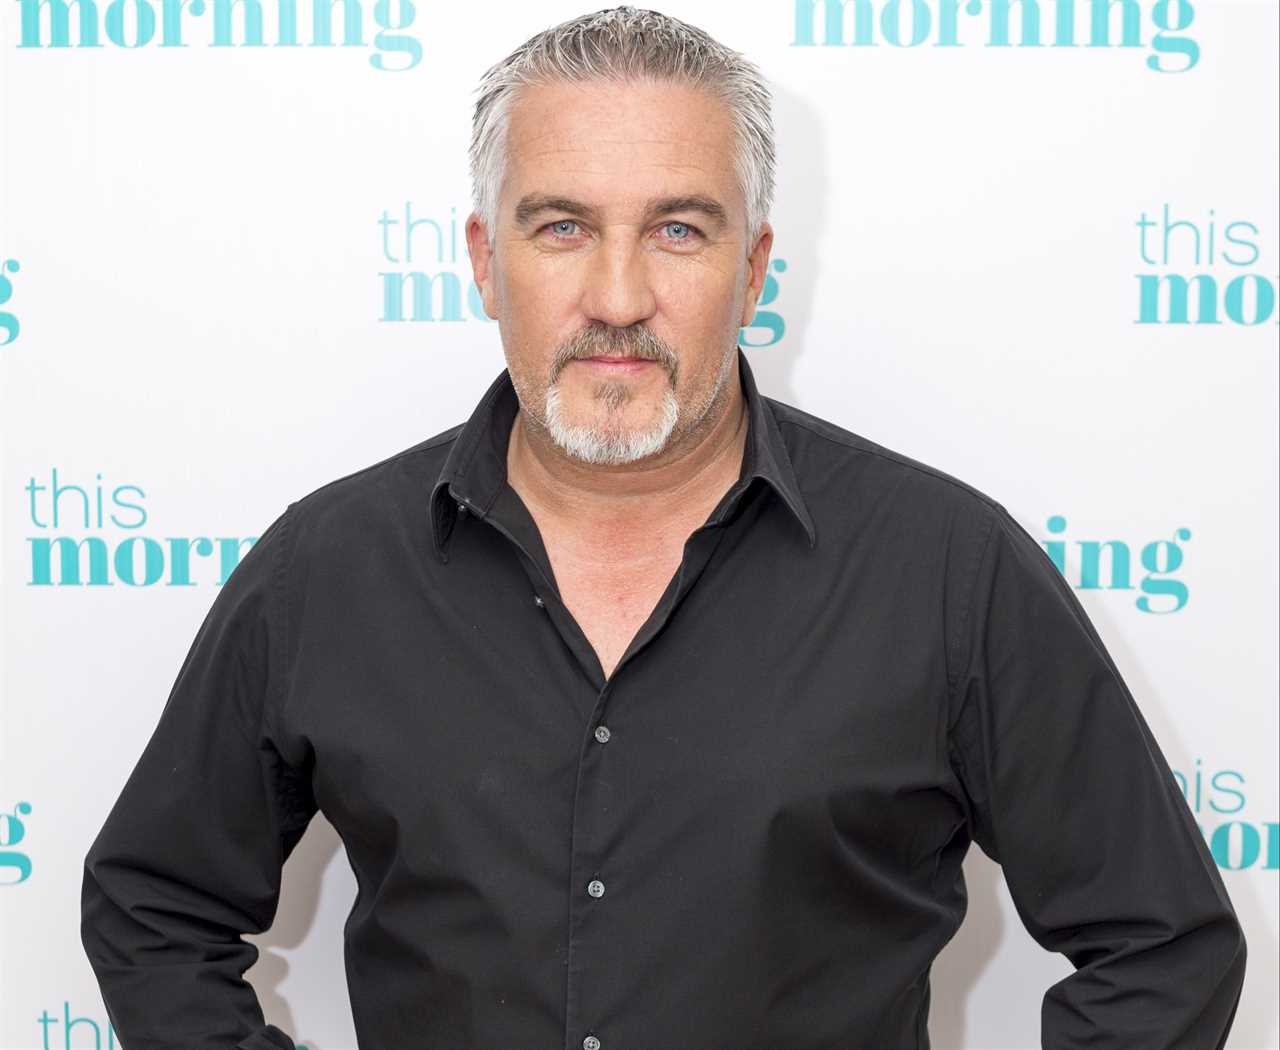 Who is Paul Hollywood and what is the Bake Off judge’s net worth?